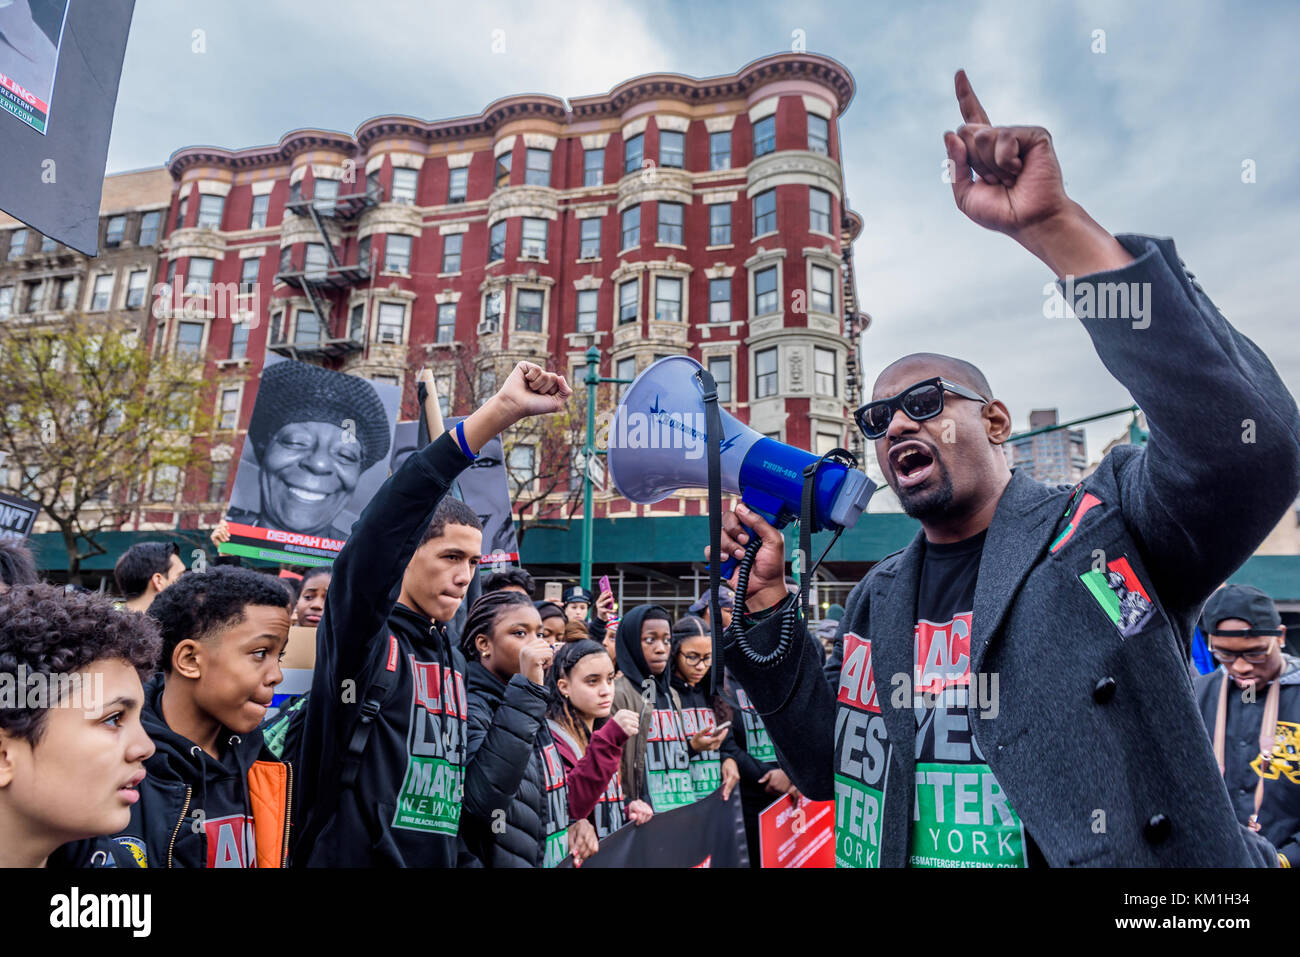 New York, United States. 02nd Dec, 2017. Students from South Bronx Community Charter High School with help from community leaders gathered at the Schomburg Center for Research in Black Culture in Harlem and led the second annual Future of the City March against police brutality on December 2, 2017; marching with students from other New York City schools against police brutality and the unjust treatment of people of color. Credit: Erik McGregor/Pacific Press/Alamy Live News Stock Photo